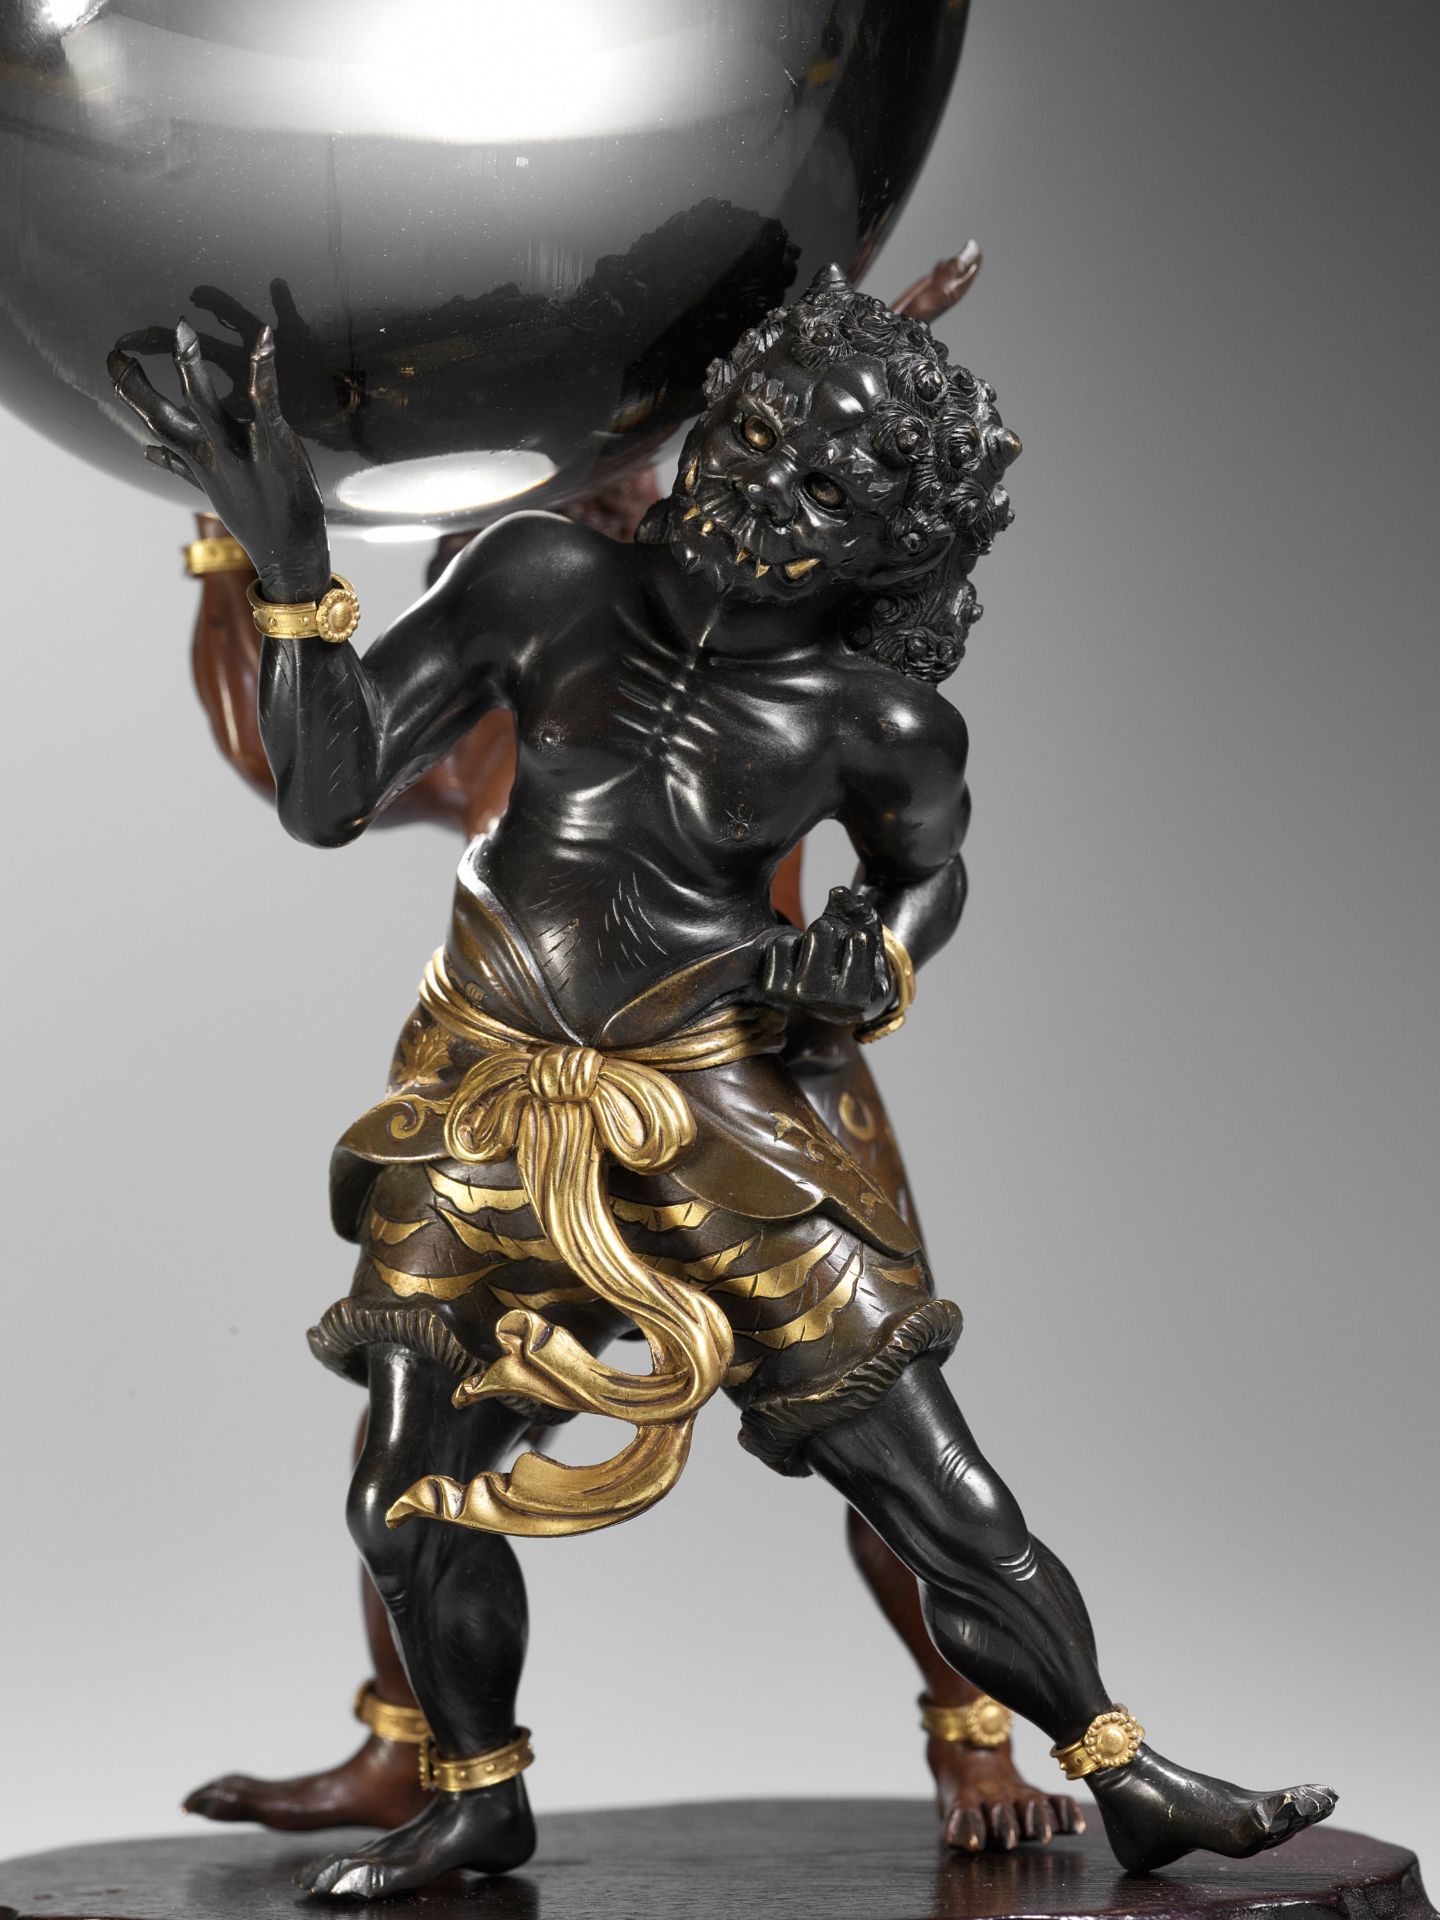 AN IMPRESSIVE BRONZE OF TWO ONI HOLDING A CRYSTAL BALL, ATTRIBUTED TO SANO TAKACHIKA - Image 4 of 12